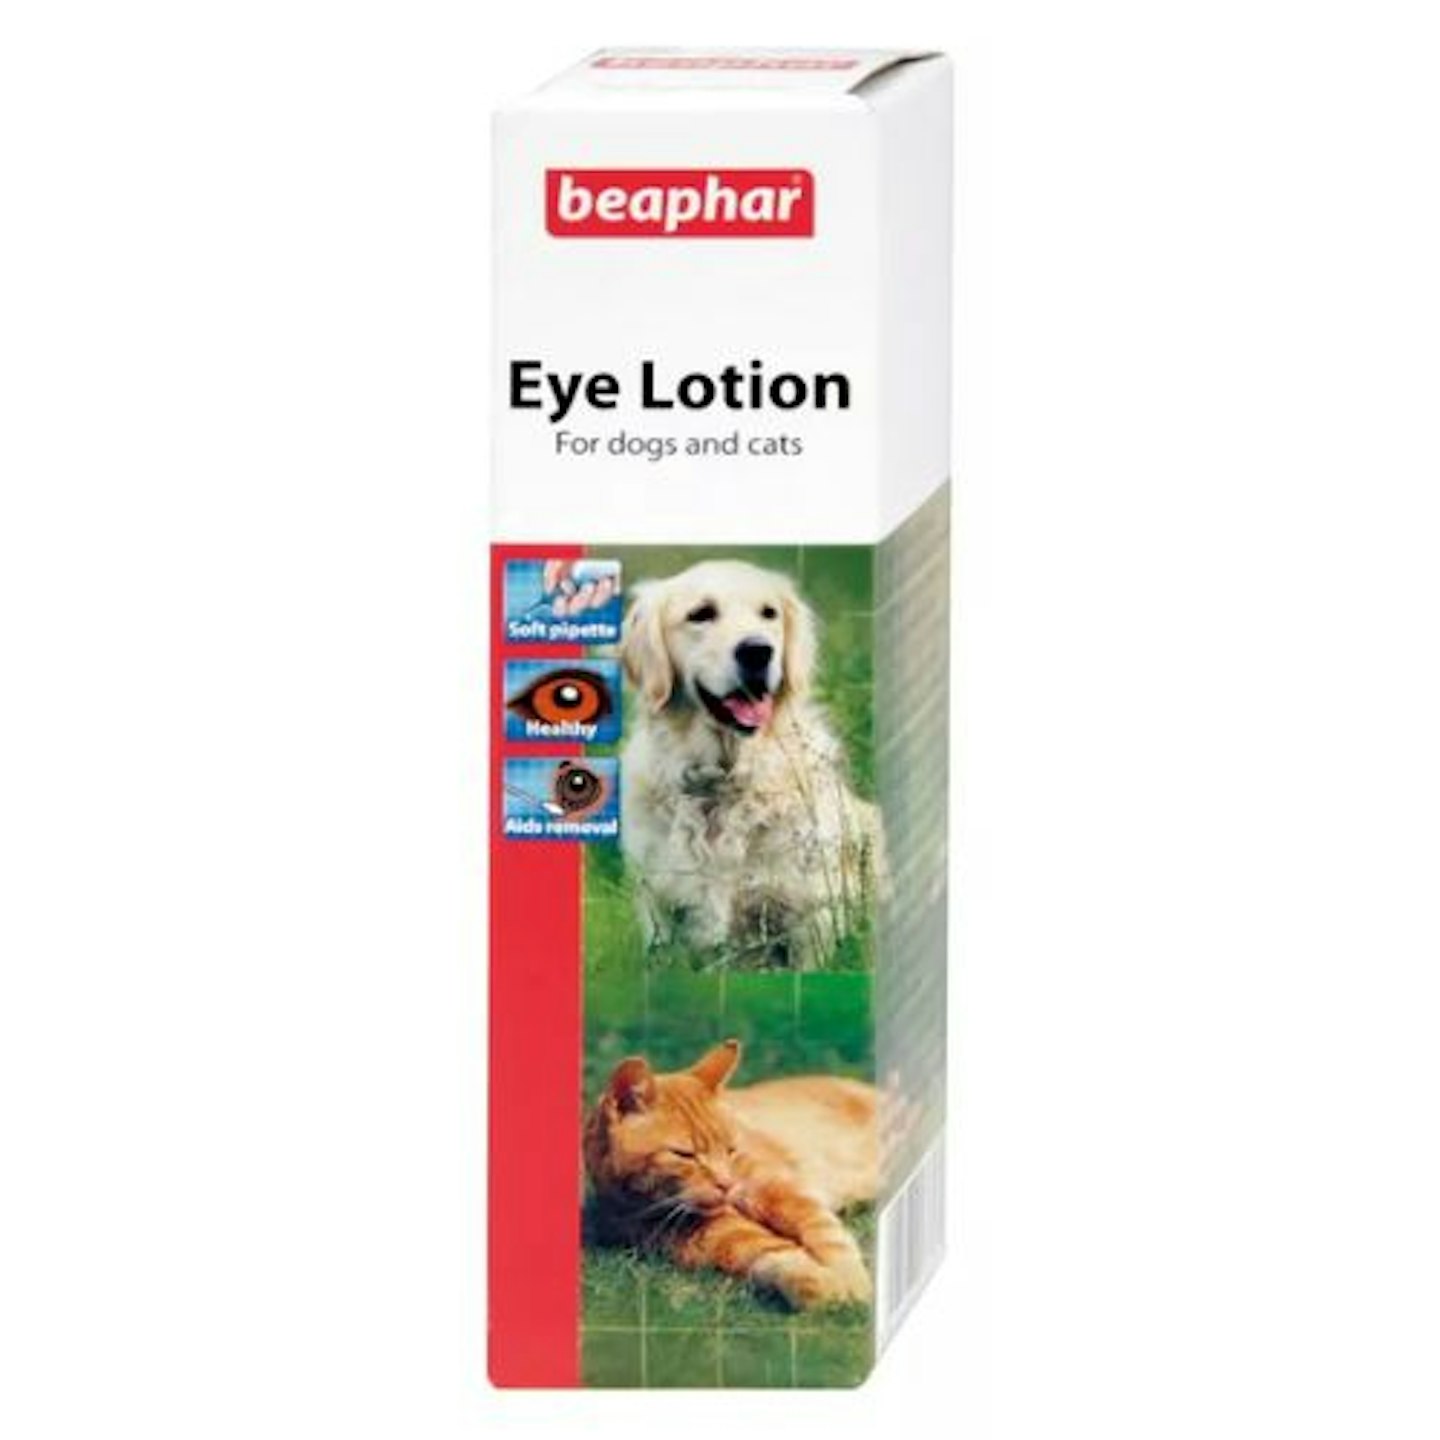 Beaphar Eye Lotion for Dogs & Cats